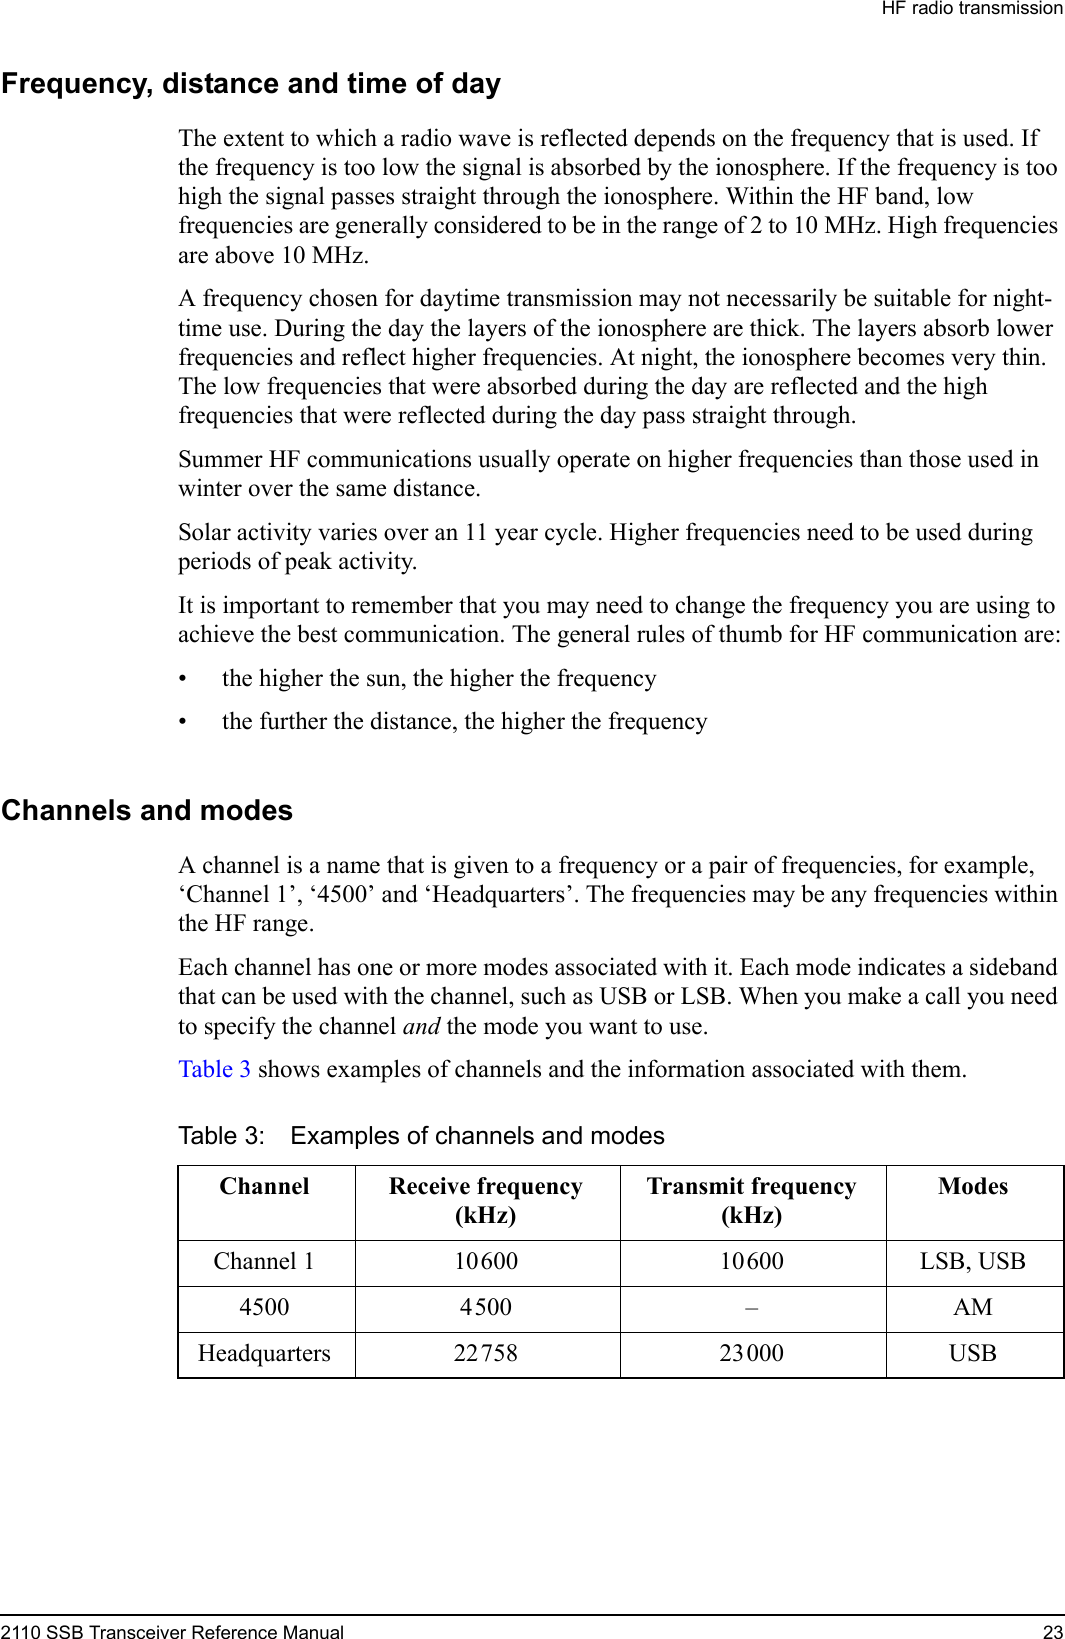 HF radio transmission2110 SSB Transceiver Reference Manual 23Frequency, distance and time of dayThe extent to which a radio wave is reflected depends on the frequency that is used. If the frequency is too low the signal is absorbed by the ionosphere. If the frequency is too high the signal passes straight through the ionosphere. Within the HF band, low frequencies are generally considered to be in the range of 2 to 10 MHz. High frequencies are above 10 MHz.A frequency chosen for daytime transmission may not necessarily be suitable for night-time use. During the day the layers of the ionosphere are thick. The layers absorb lower frequencies and reflect higher frequencies. At night, the ionosphere becomes very thin. The low frequencies that were absorbed during the day are reflected and the high frequencies that were reflected during the day pass straight through.Summer HF communications usually operate on higher frequencies than those used in winter over the same distance.Solar activity varies over an 11 year cycle. Higher frequencies need to be used during periods of peak activity.It is important to remember that you may need to change the frequency you are using to achieve the best communication. The general rules of thumb for HF communication are:• the higher the sun, the higher the frequency• the further the distance, the higher the frequencyChannels and modesA channel is a name that is given to a frequency or a pair of frequencies, for example, ‘Channel 1’, ‘4500’ and ‘Headquarters’. The frequencies may be any frequencies within the HF range. Each channel has one or more modes associated with it. Each mode indicates a sideband that can be used with the channel, such as USB or LSB. When you make a call you need to specify the channel and the mode you want to use.Table 3 shows examples of channels and the information associated with them.Table 3: Examples of channels and modesChannel Receive frequency(kHz)Transmit frequency(kHz)ModesChannel 1 10600 10600 LSB, USB4500 4500 – AMHeadquarters 22758 23000 USB